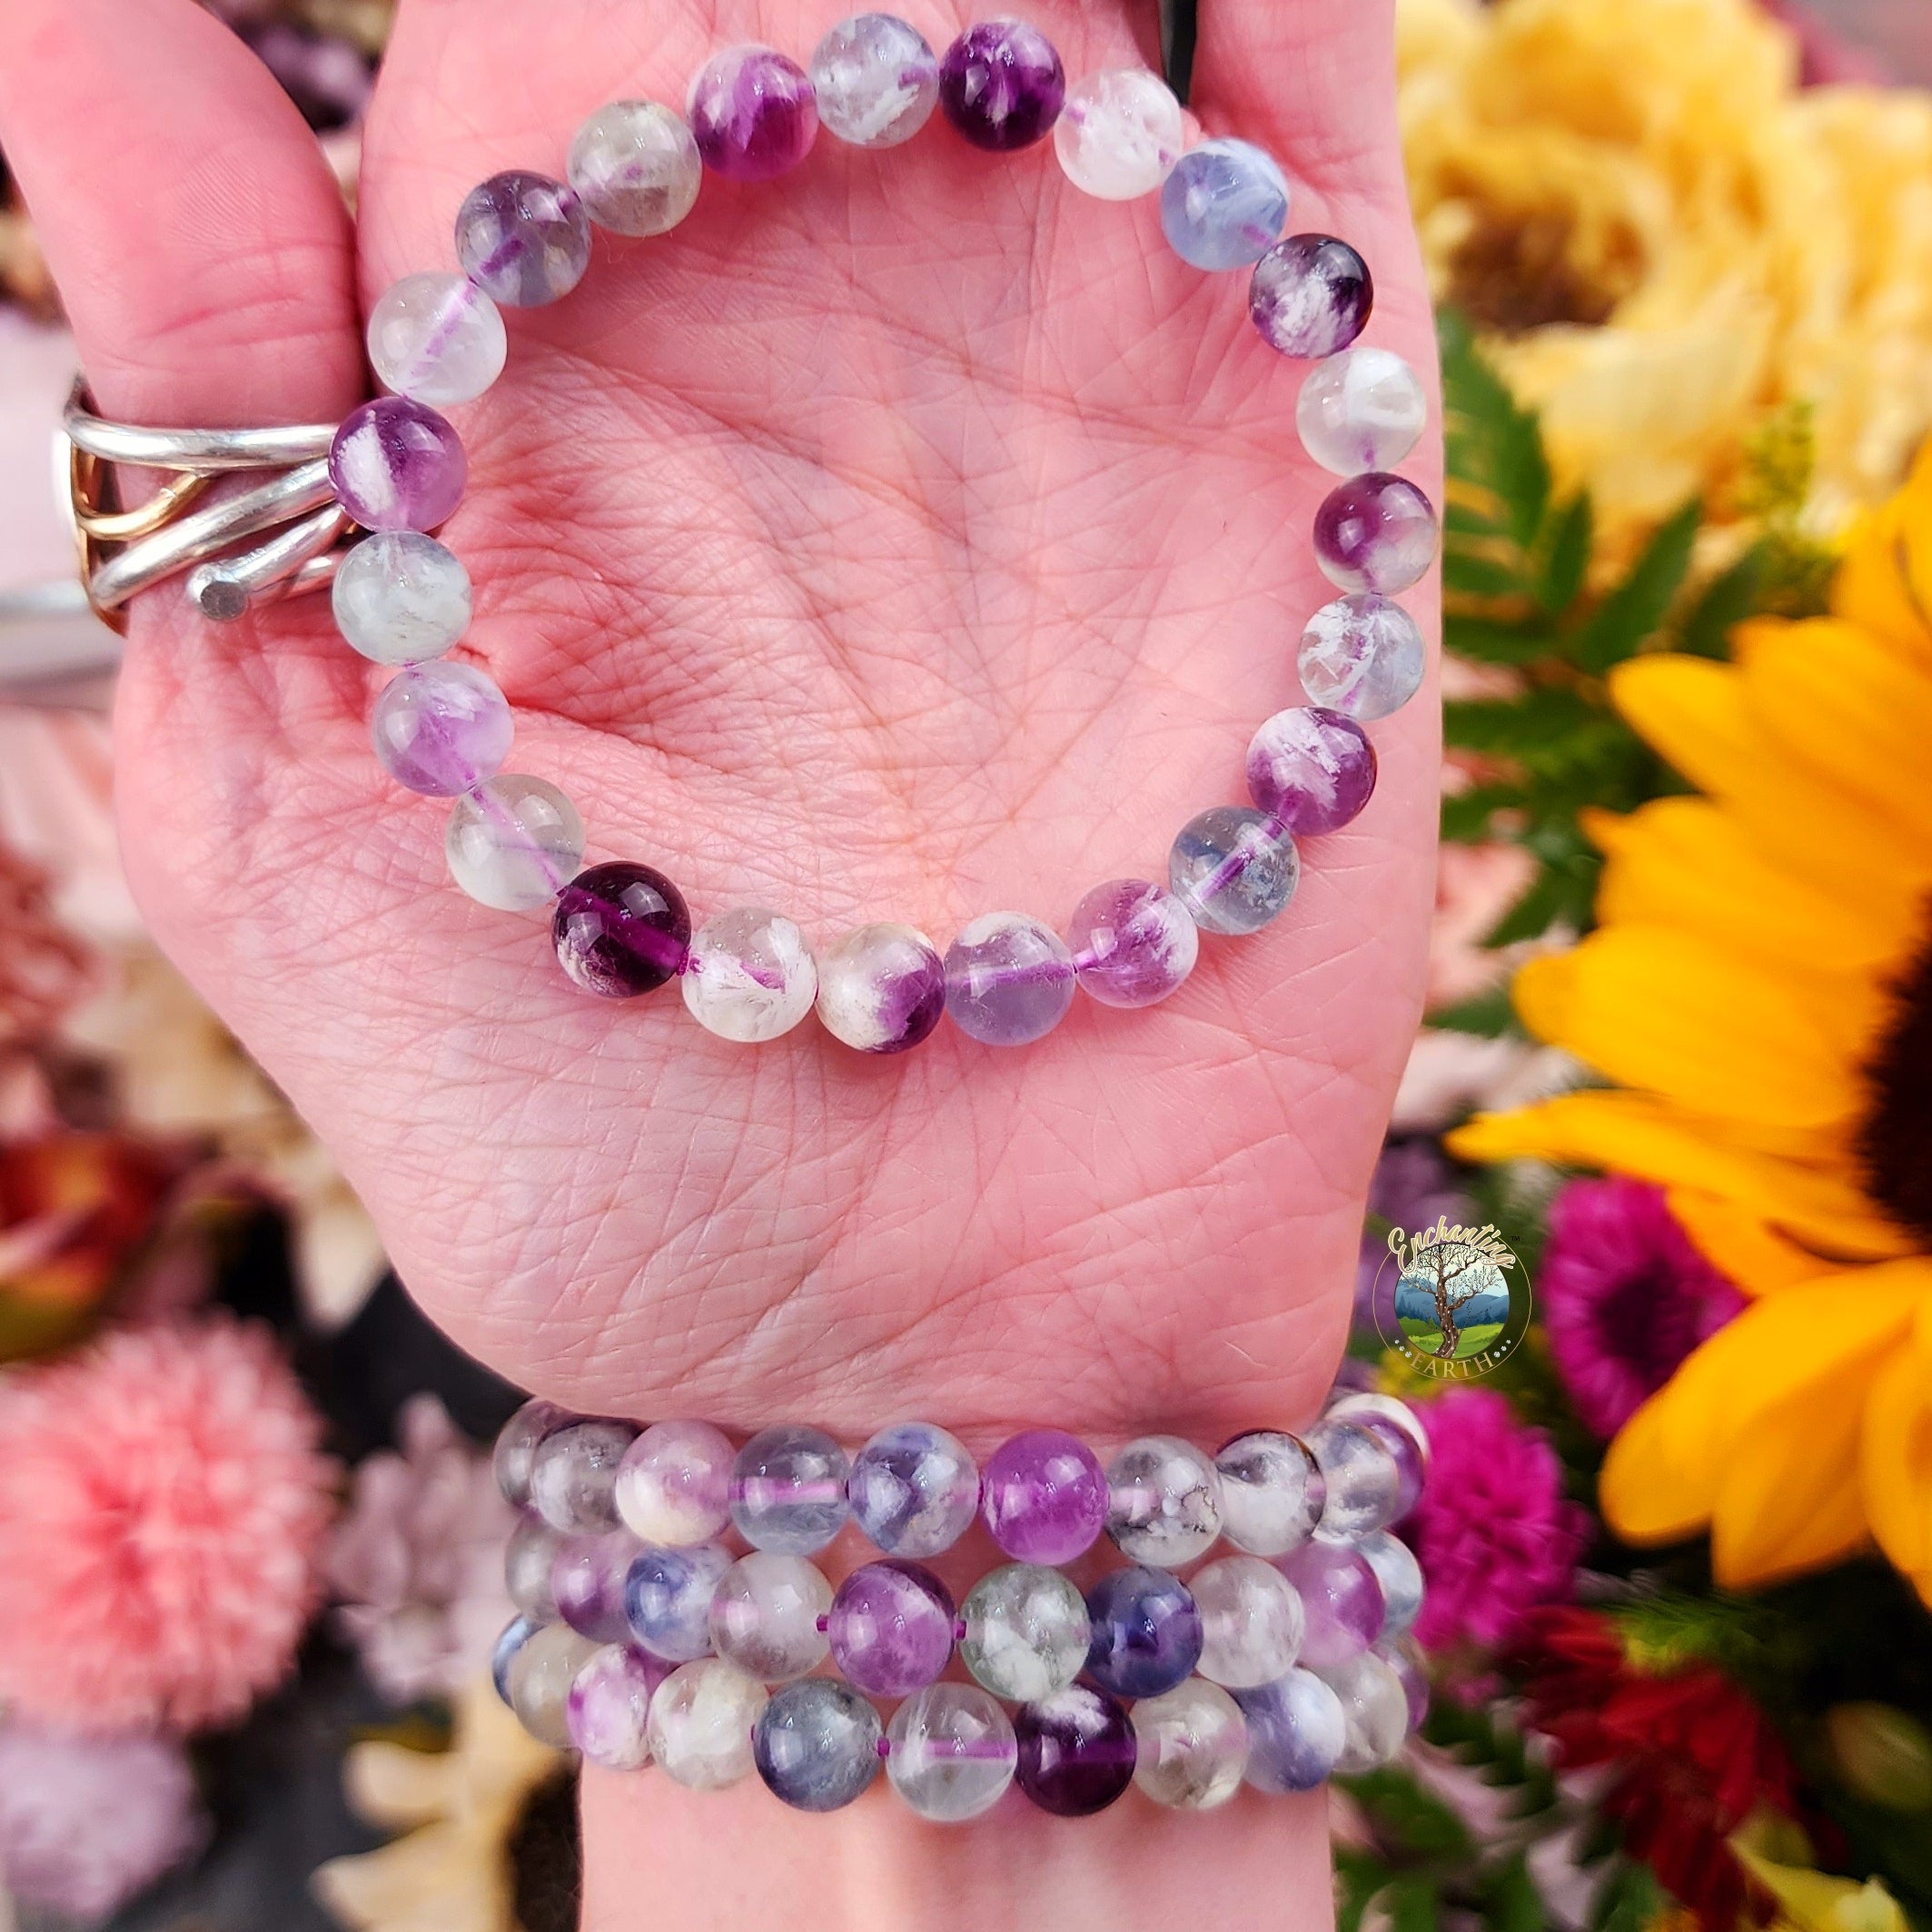 Fluorite "Feather" Bracelet for Focus and Mental Clarity